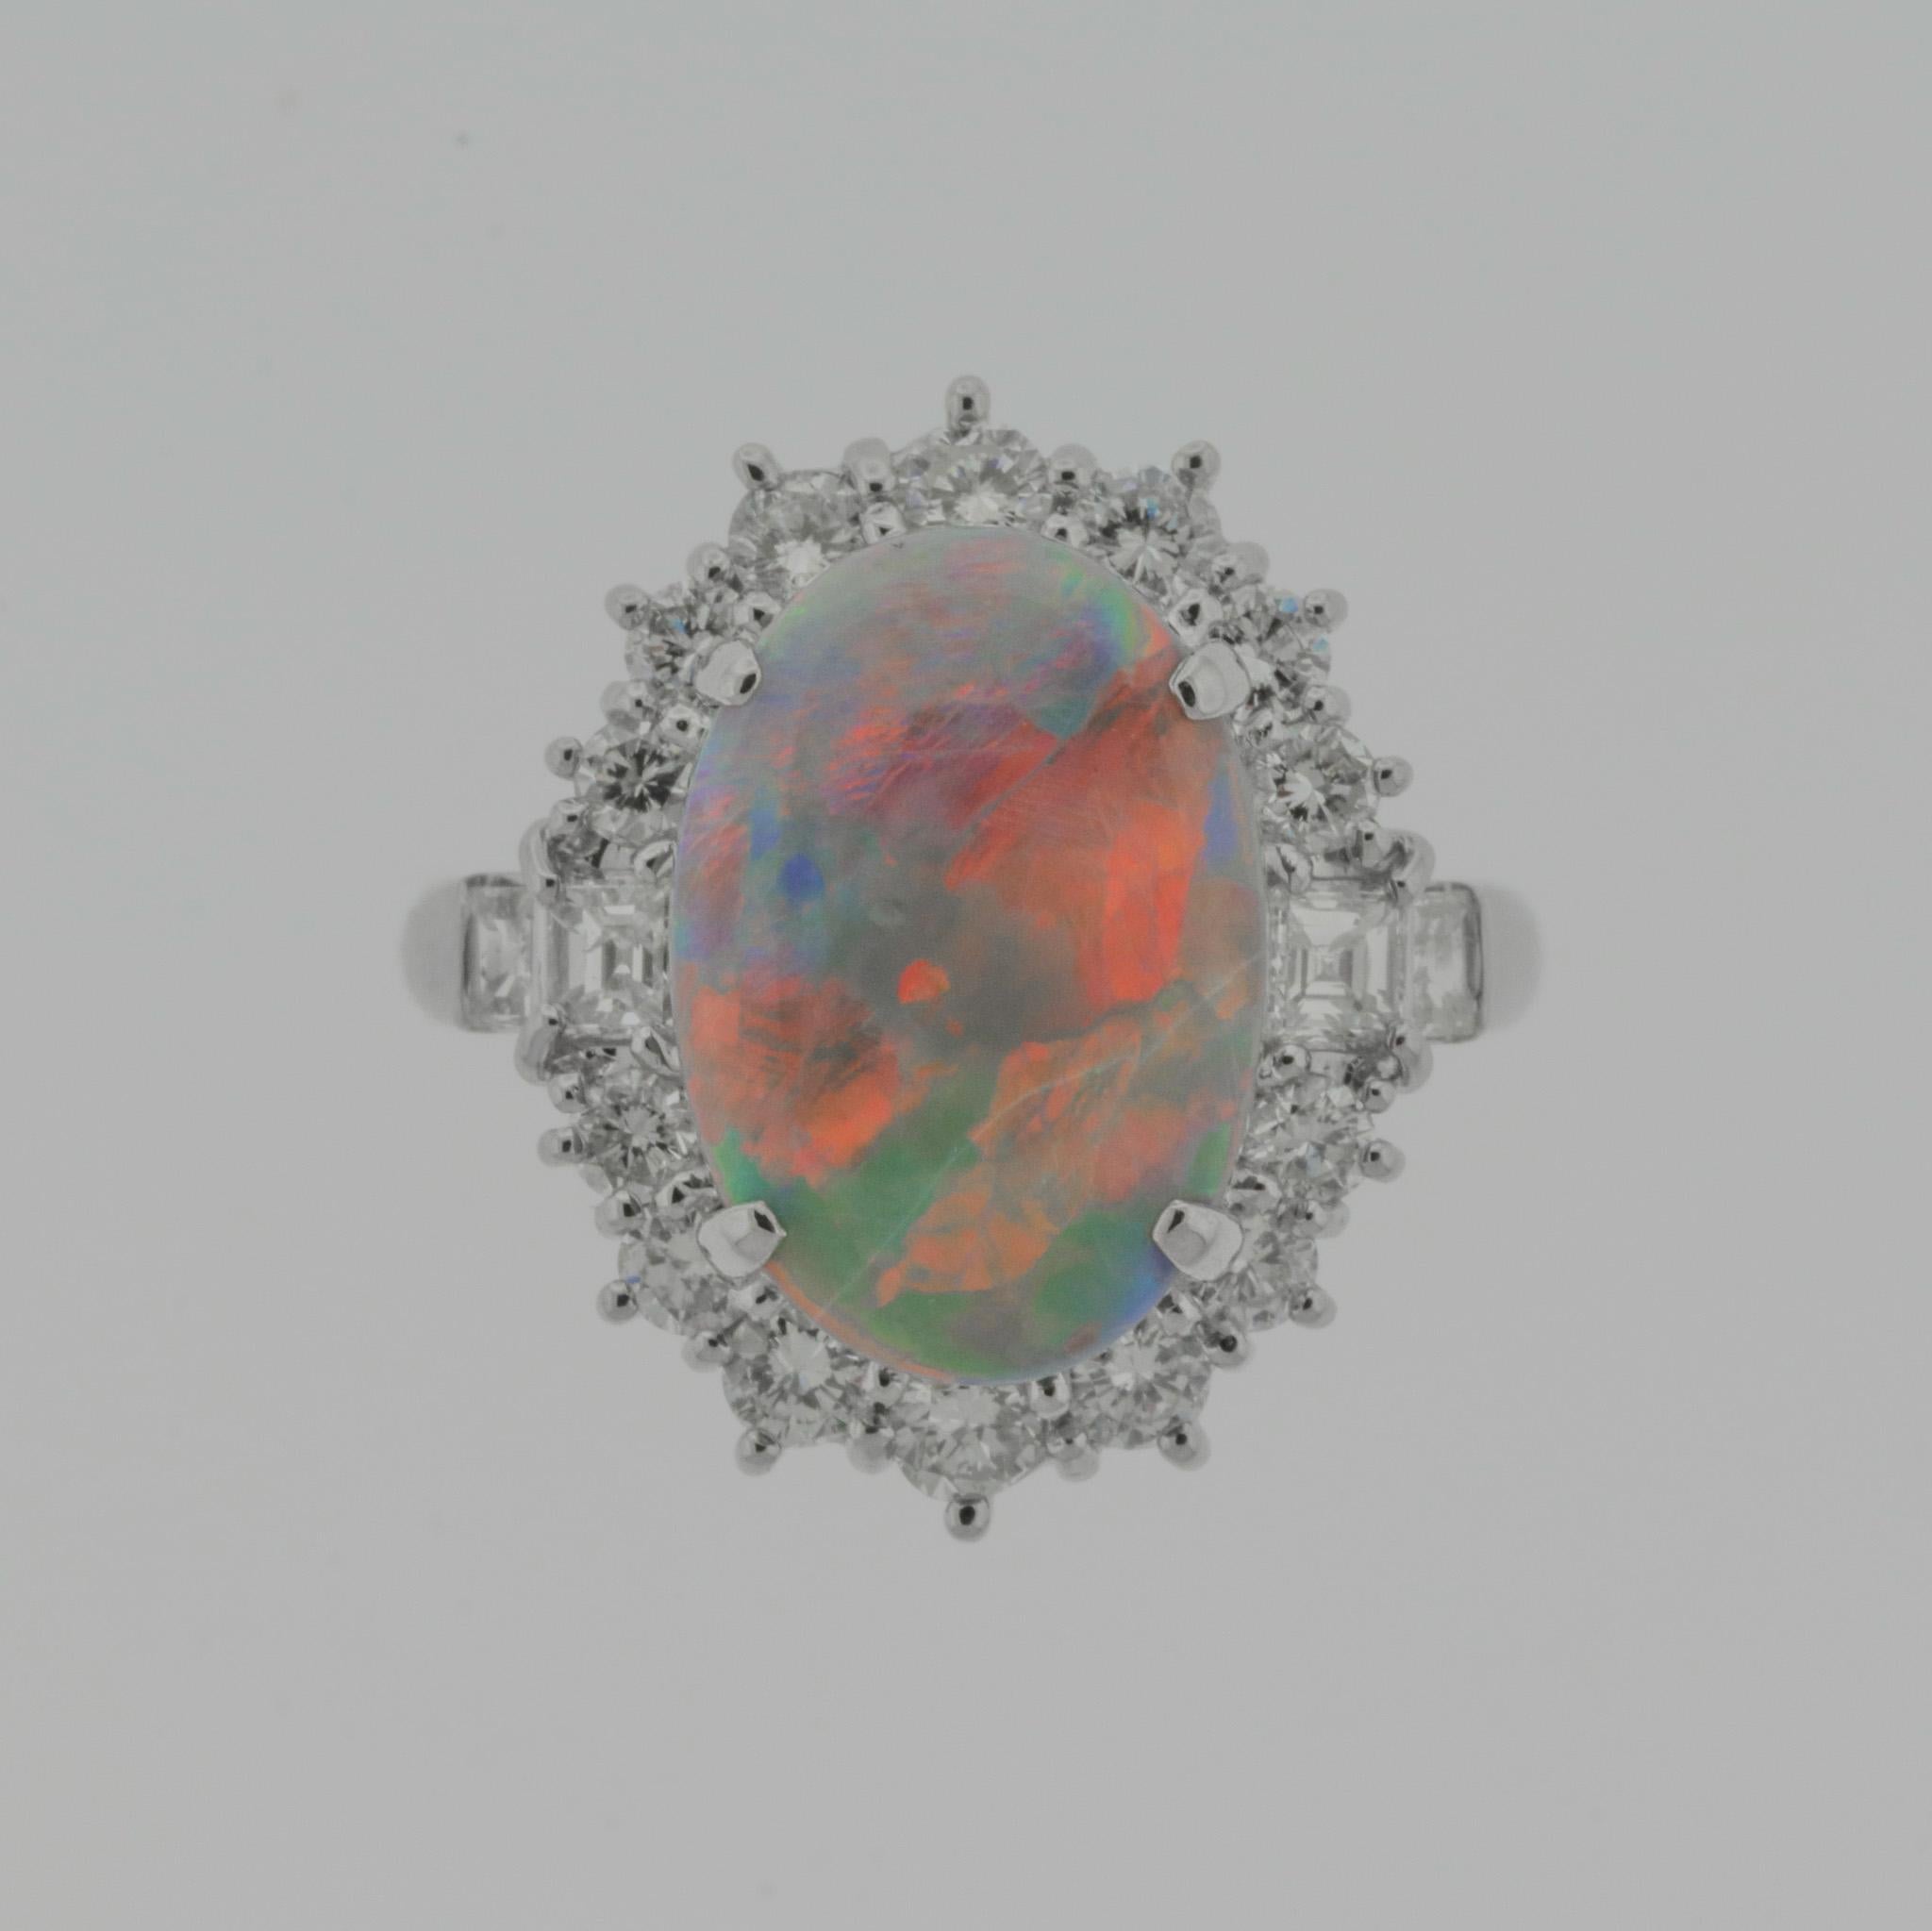 A deal of a natural 3.96 carat Australian opal, which some would consider as black, offered at a great deal! It has lovely play-of-color as mainly flashes of red and orange, as well as blues and greens can be seen across the stone. It is